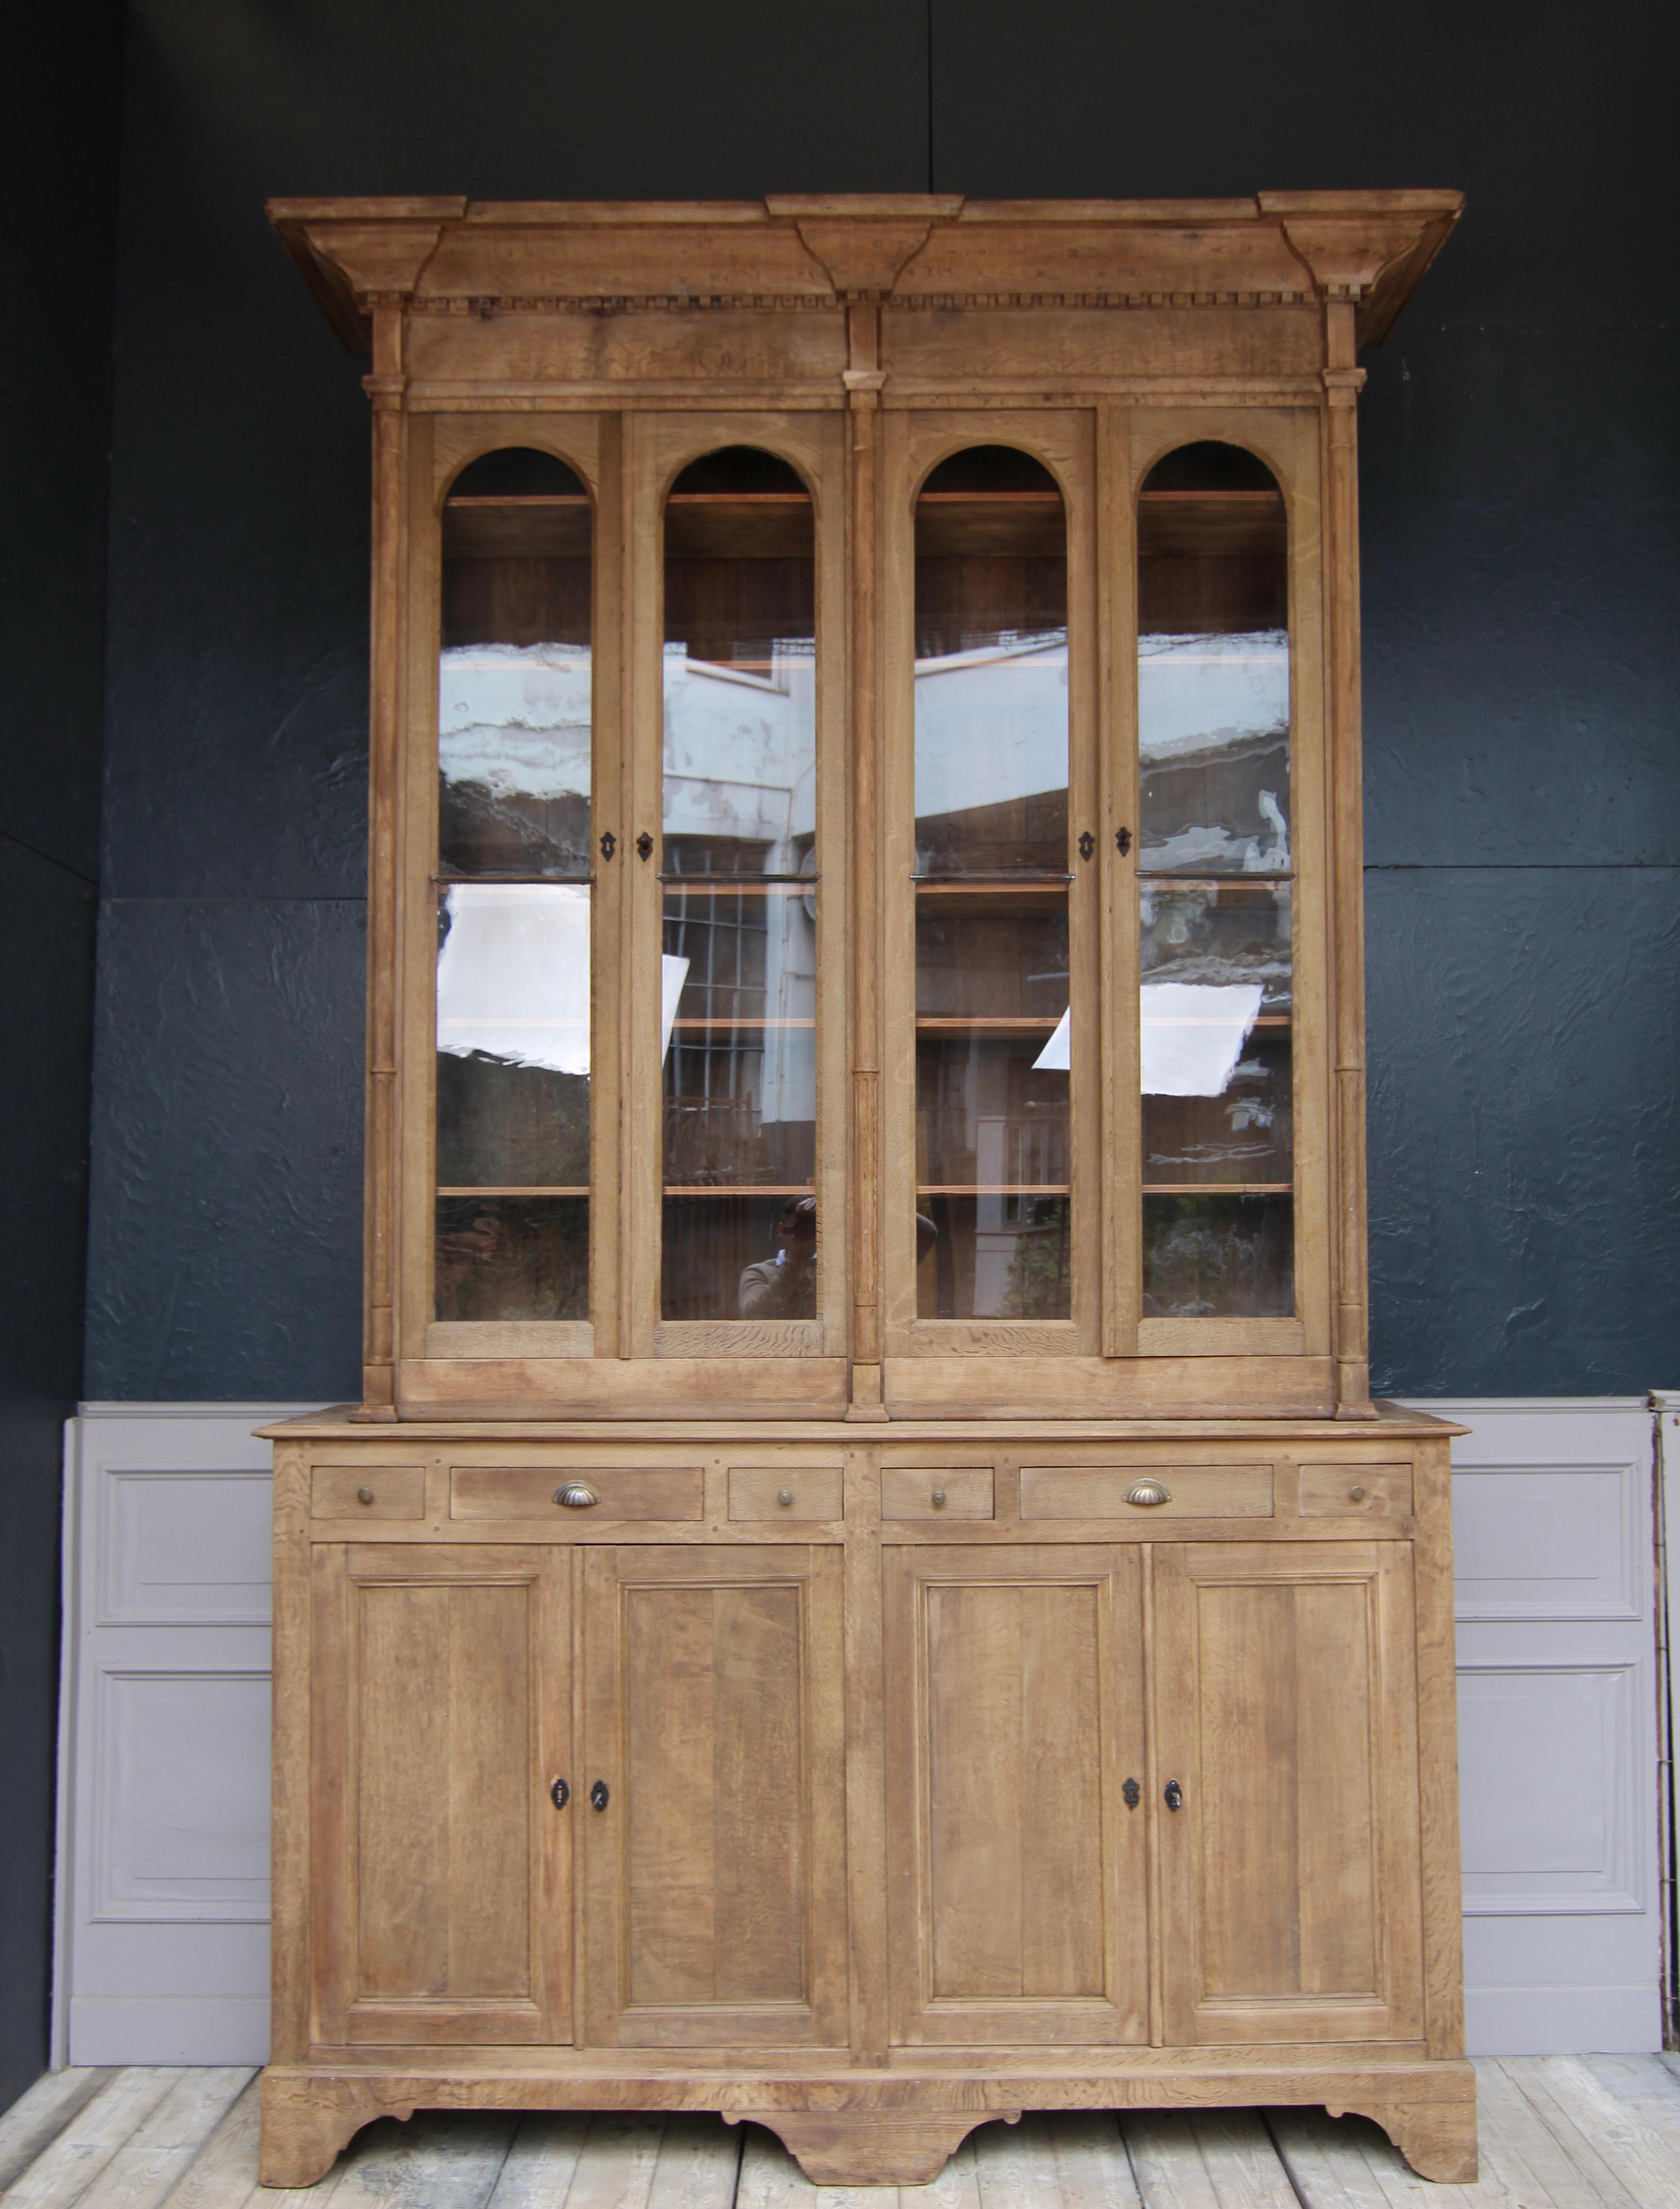 Representative tall display cabinet or library from the 2nd half of the 19th century. Solidly made of oak wood.

Cabinets of this type were found in public buildings such as town halls or museums.

Consisting of a four-door base cabinet with 6